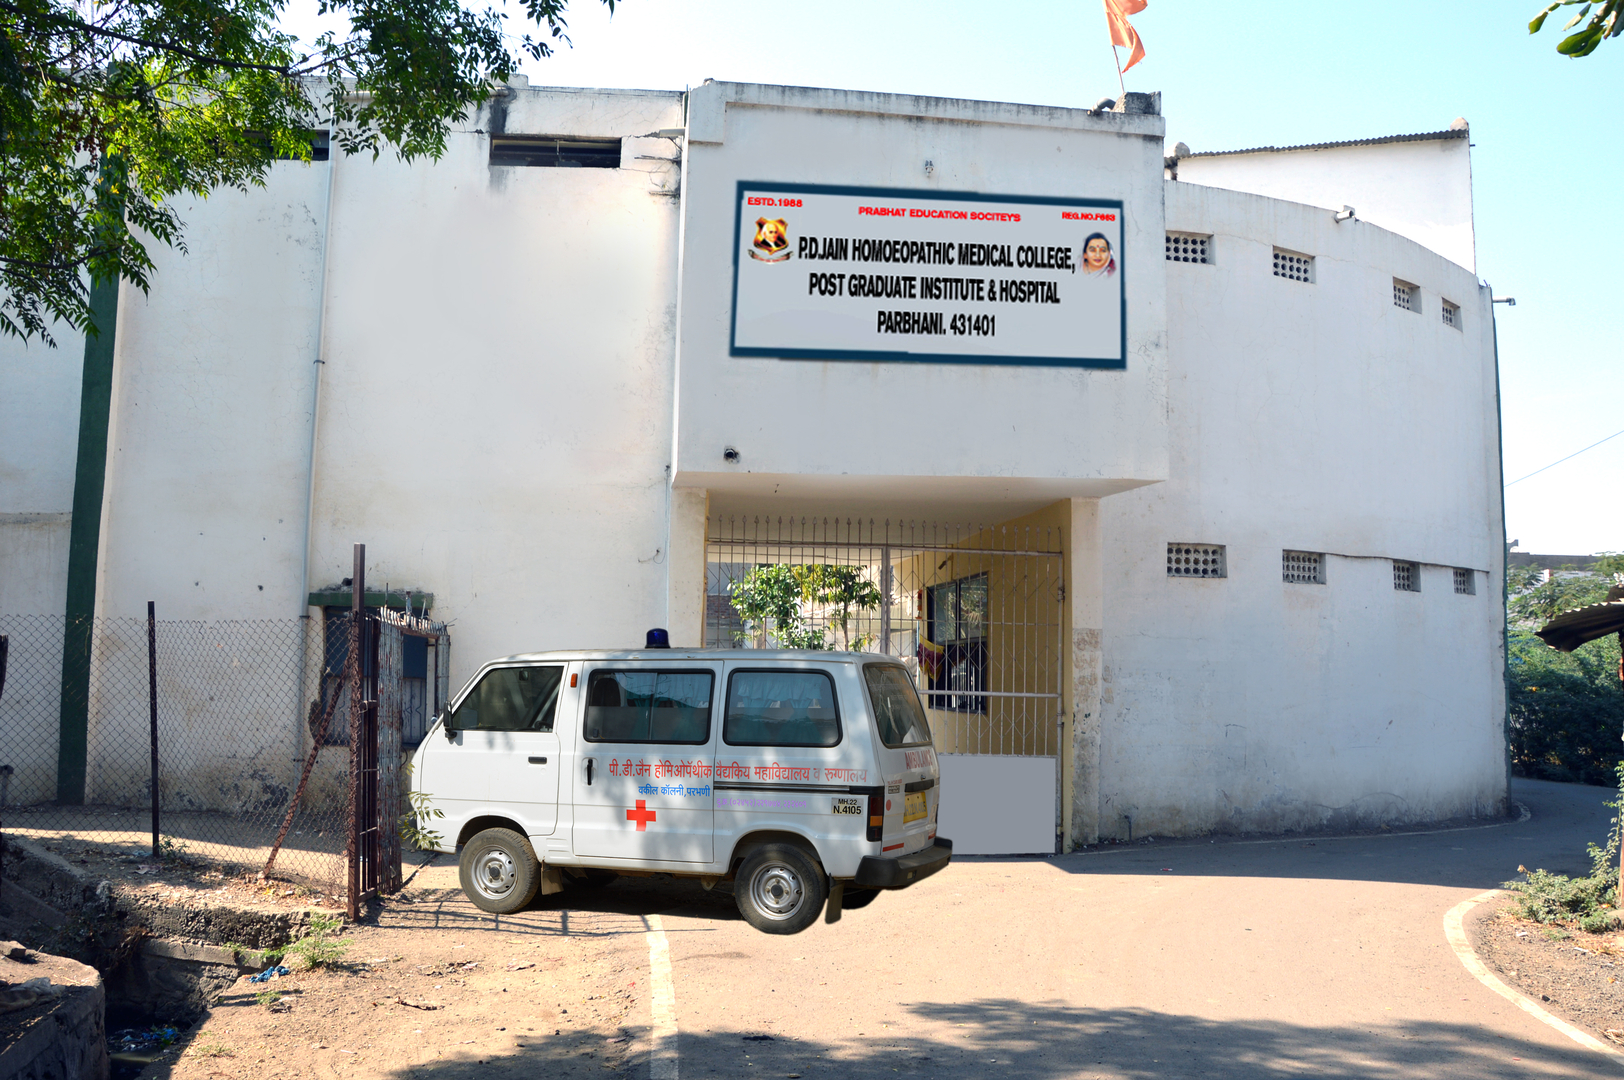 P.D.Jain Homoeopathic Medical College and Hospital Post Graduate Institute, Parbhani Image